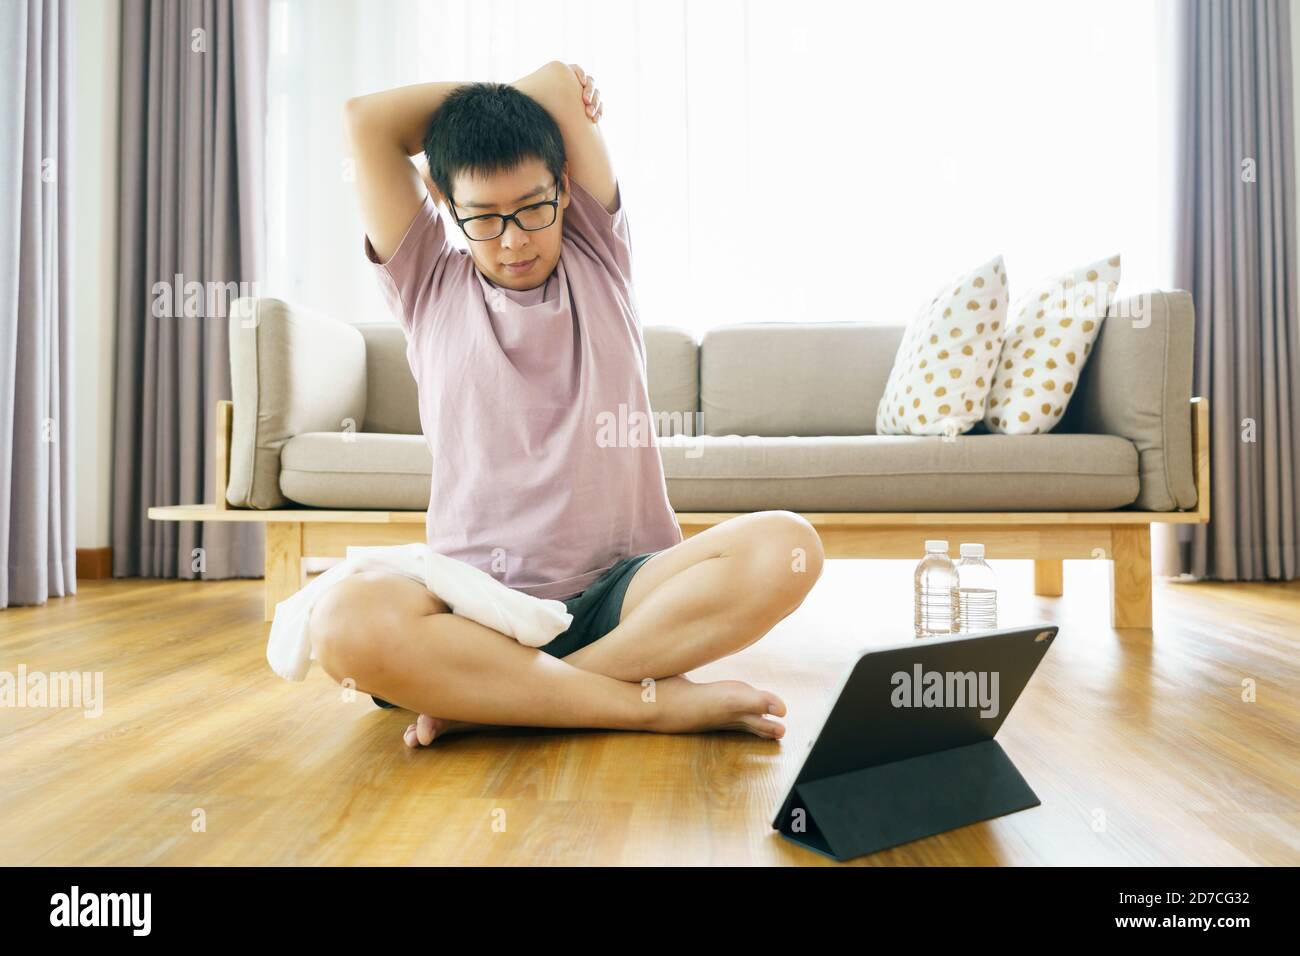 New normal Training At Home An Asian man, aged 35-40, with brown skin, Home exercise. exercising in living room. Stock Photo